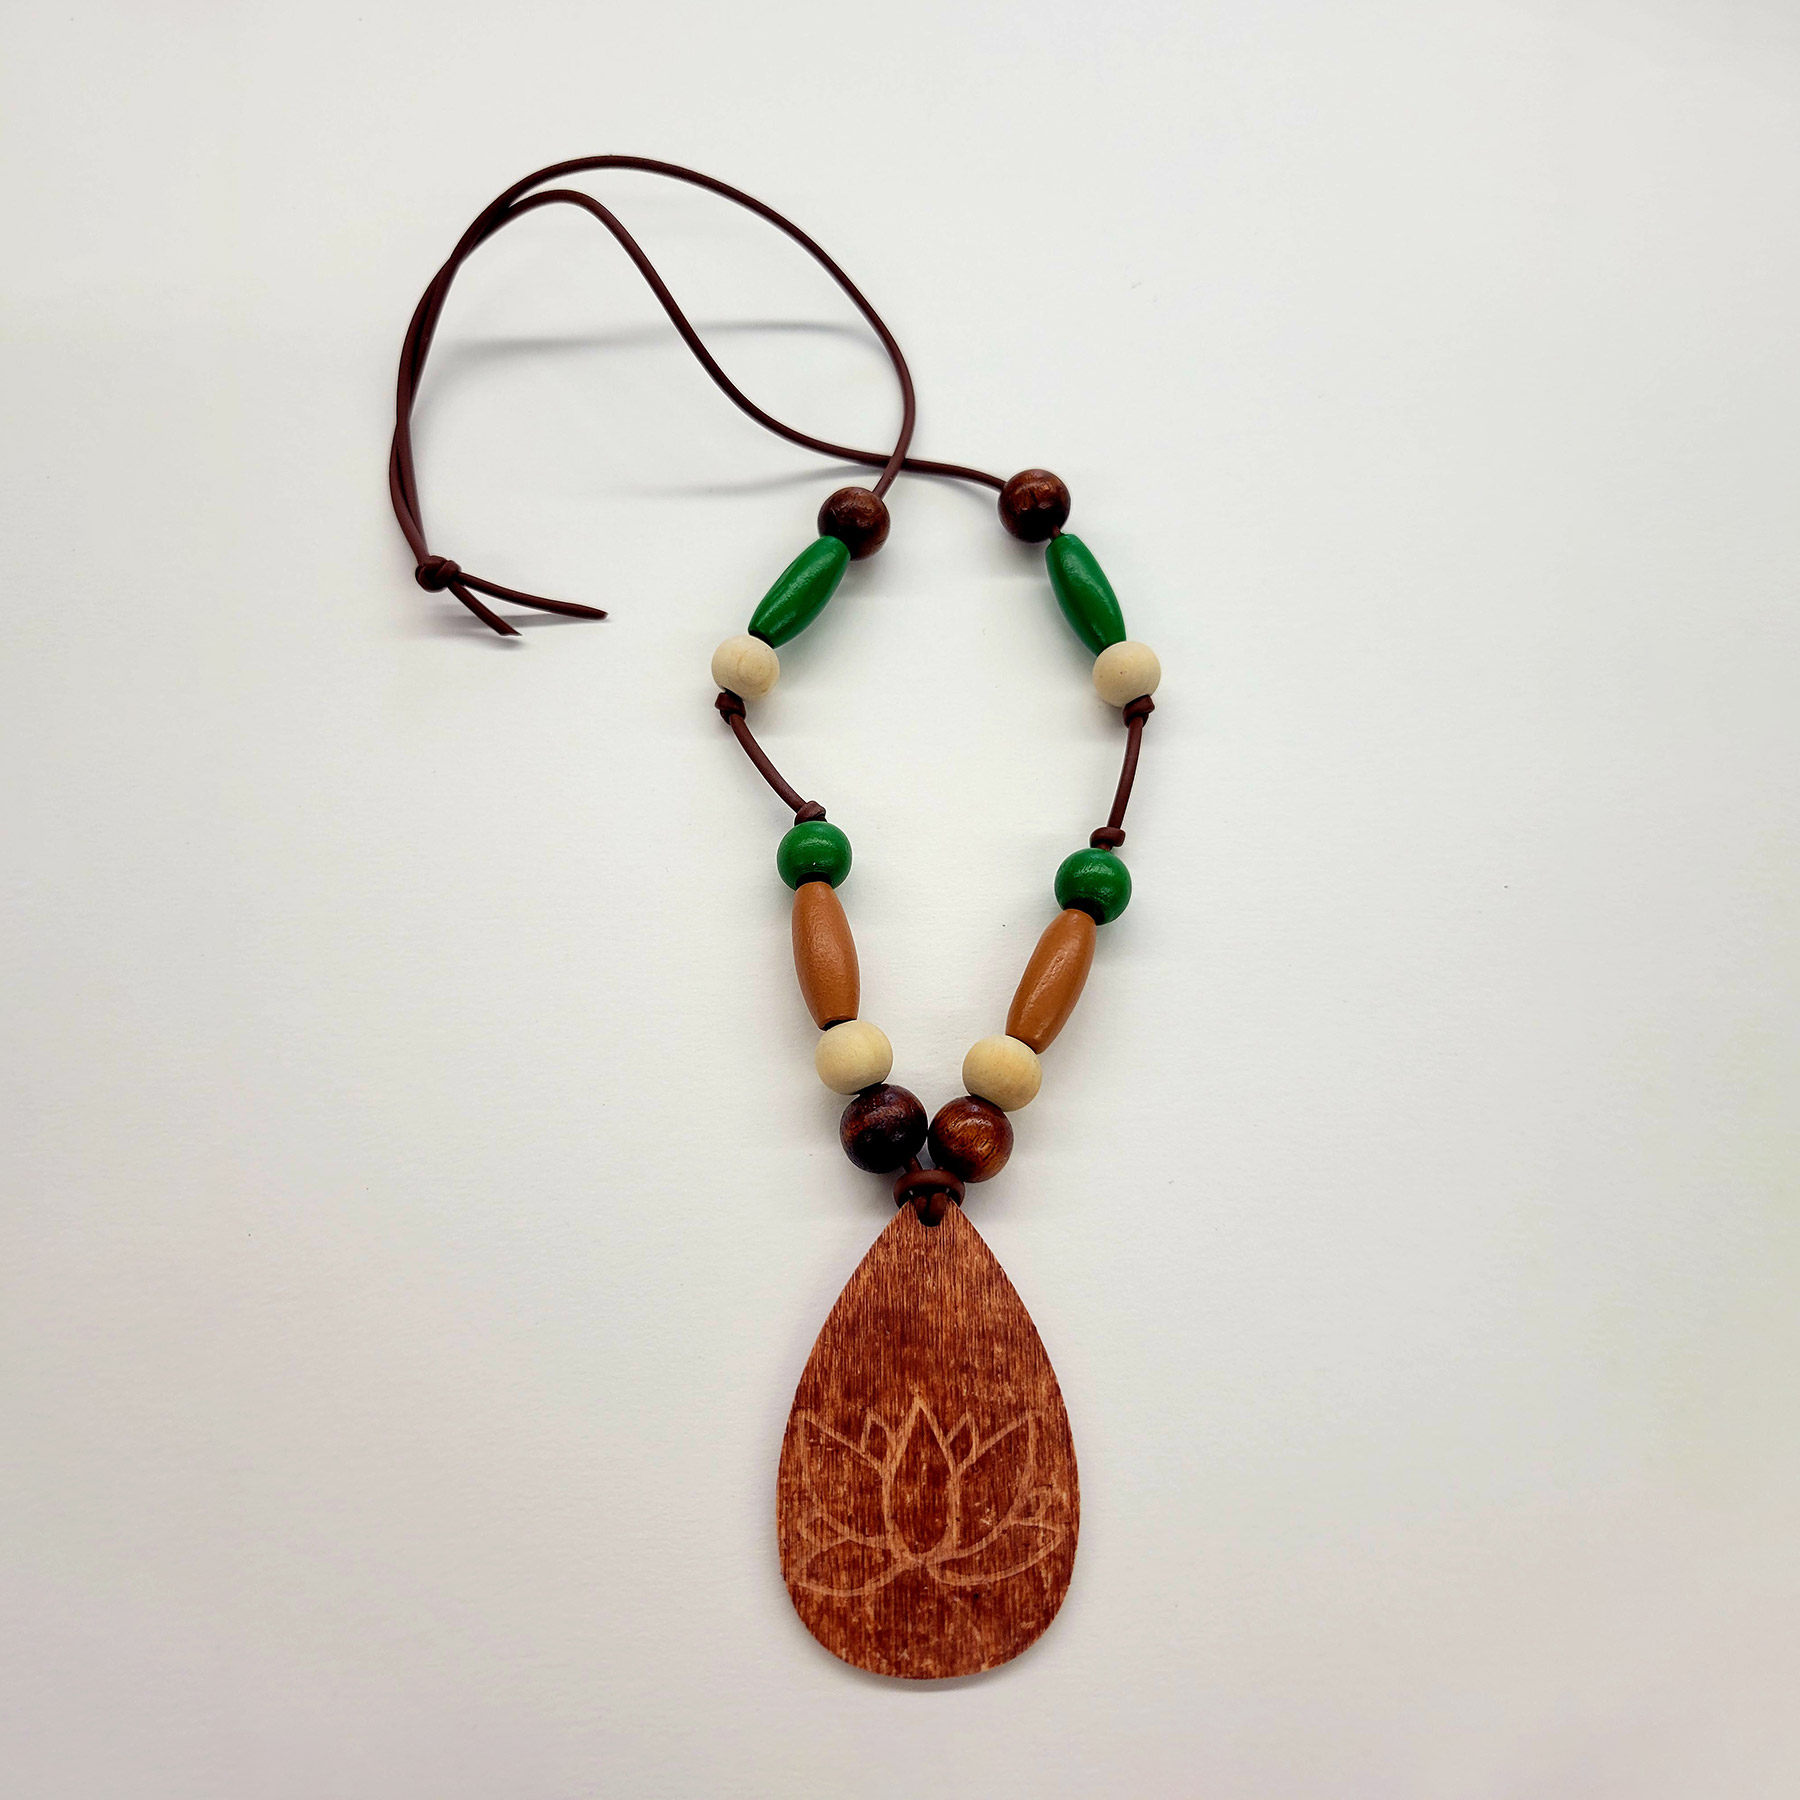 Beaded necklace with a wooden tag, which is etched with a lotus flower design